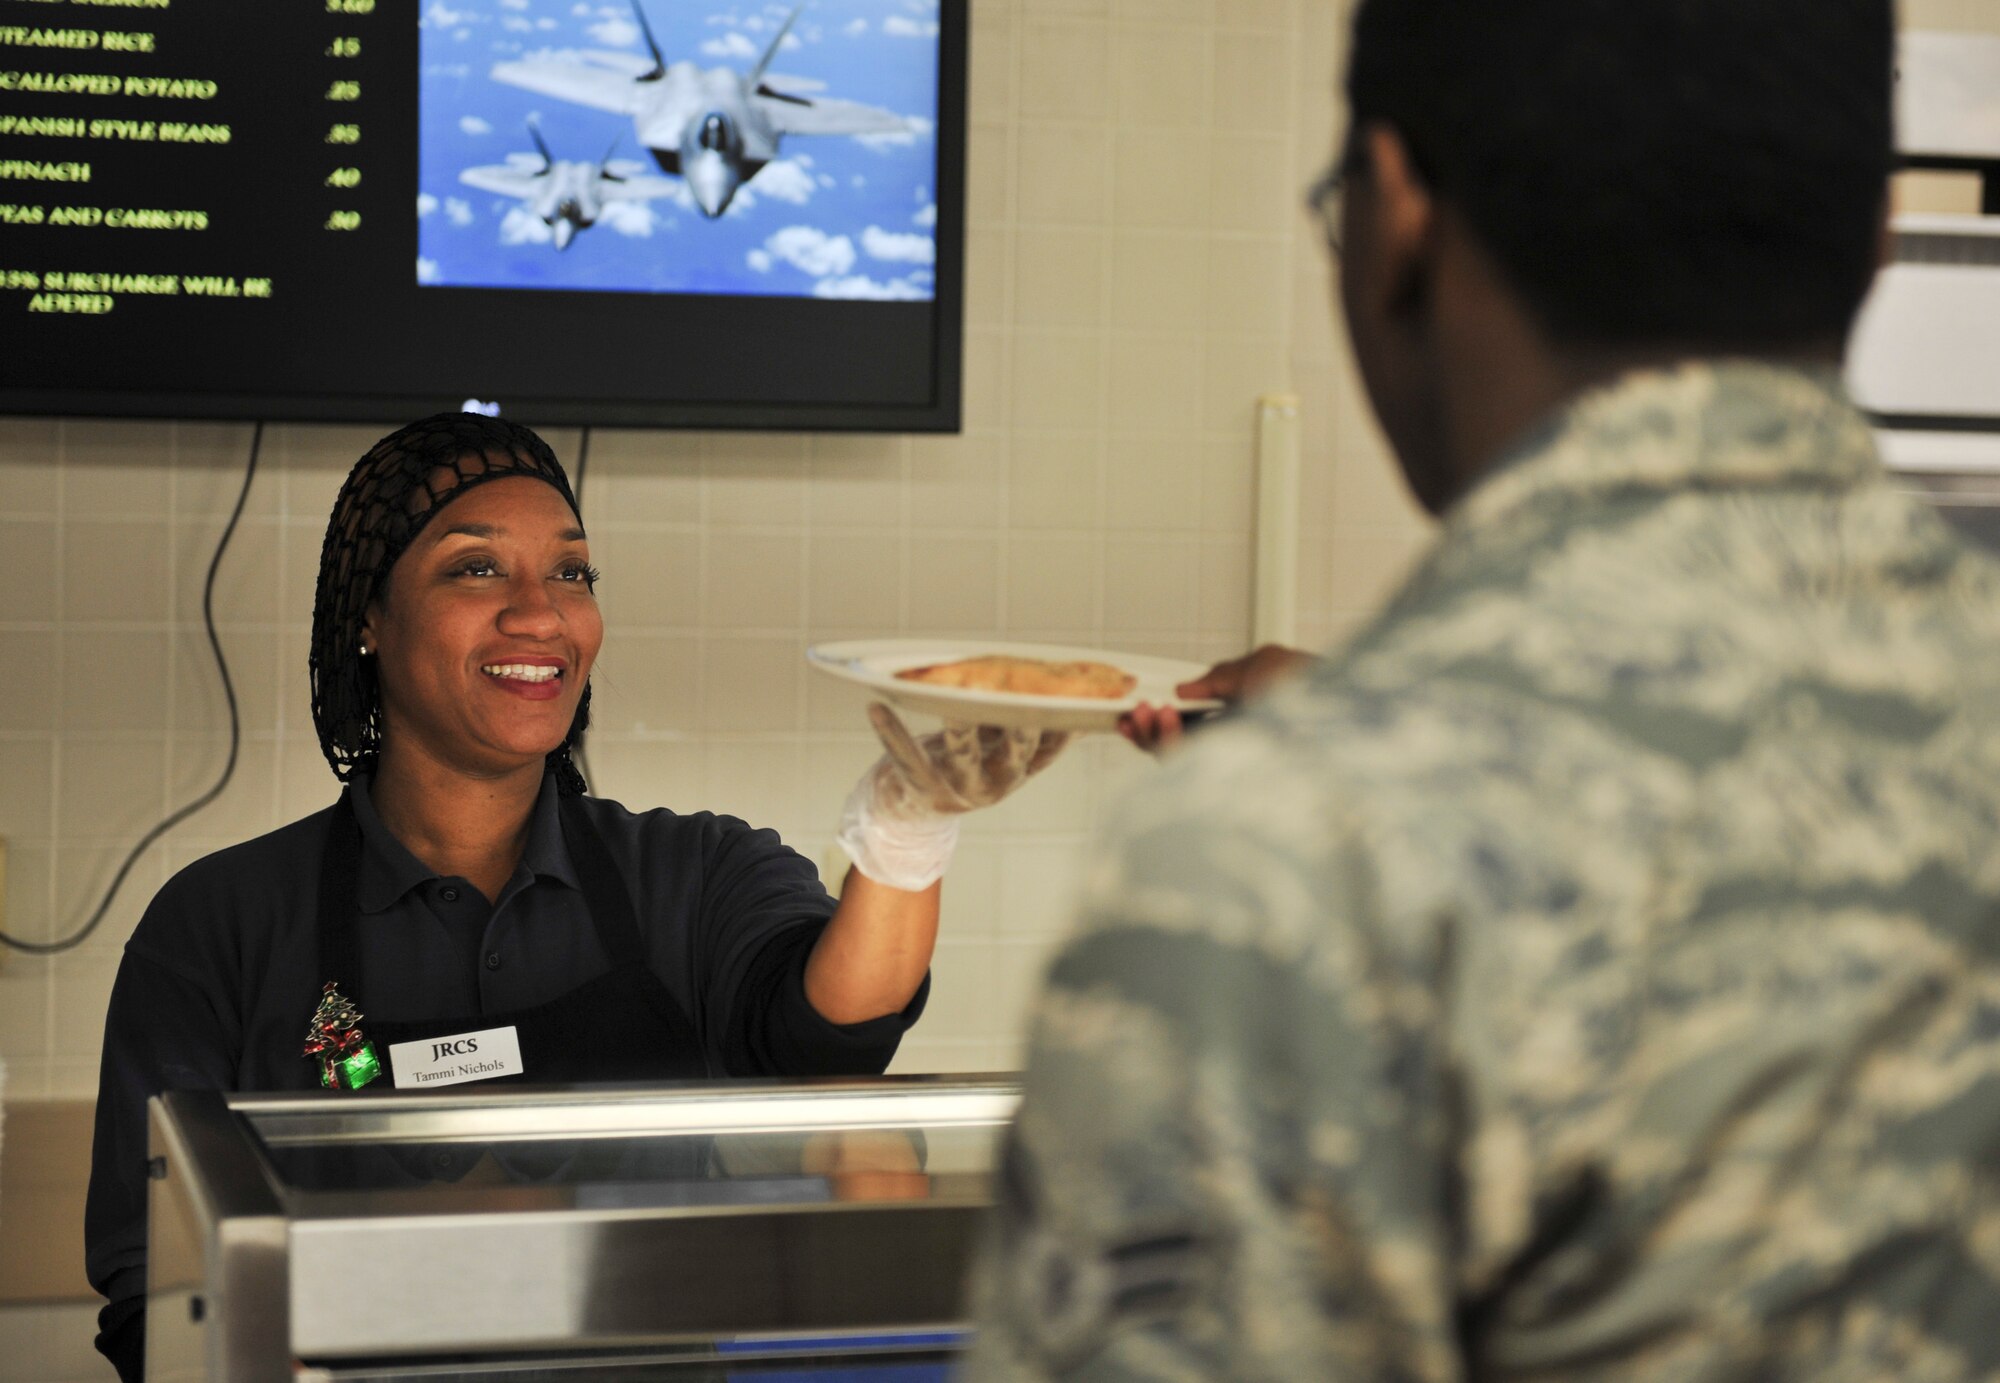 Tammi Nichols, 325th Force Support Squadron food service assistant, prepares a plate for an Airman at the Berg-Lilles Dining Facility at Tyndall Air Force Base, Fla., Dec. 9, 2016. The 325th FSS is tasked with providing essential services to more than 800 personnel during Checkered Flag17-1/Combat Archer 17-1. (U.S. Air force photo by Senior Airman Dustin Mullen/Released)